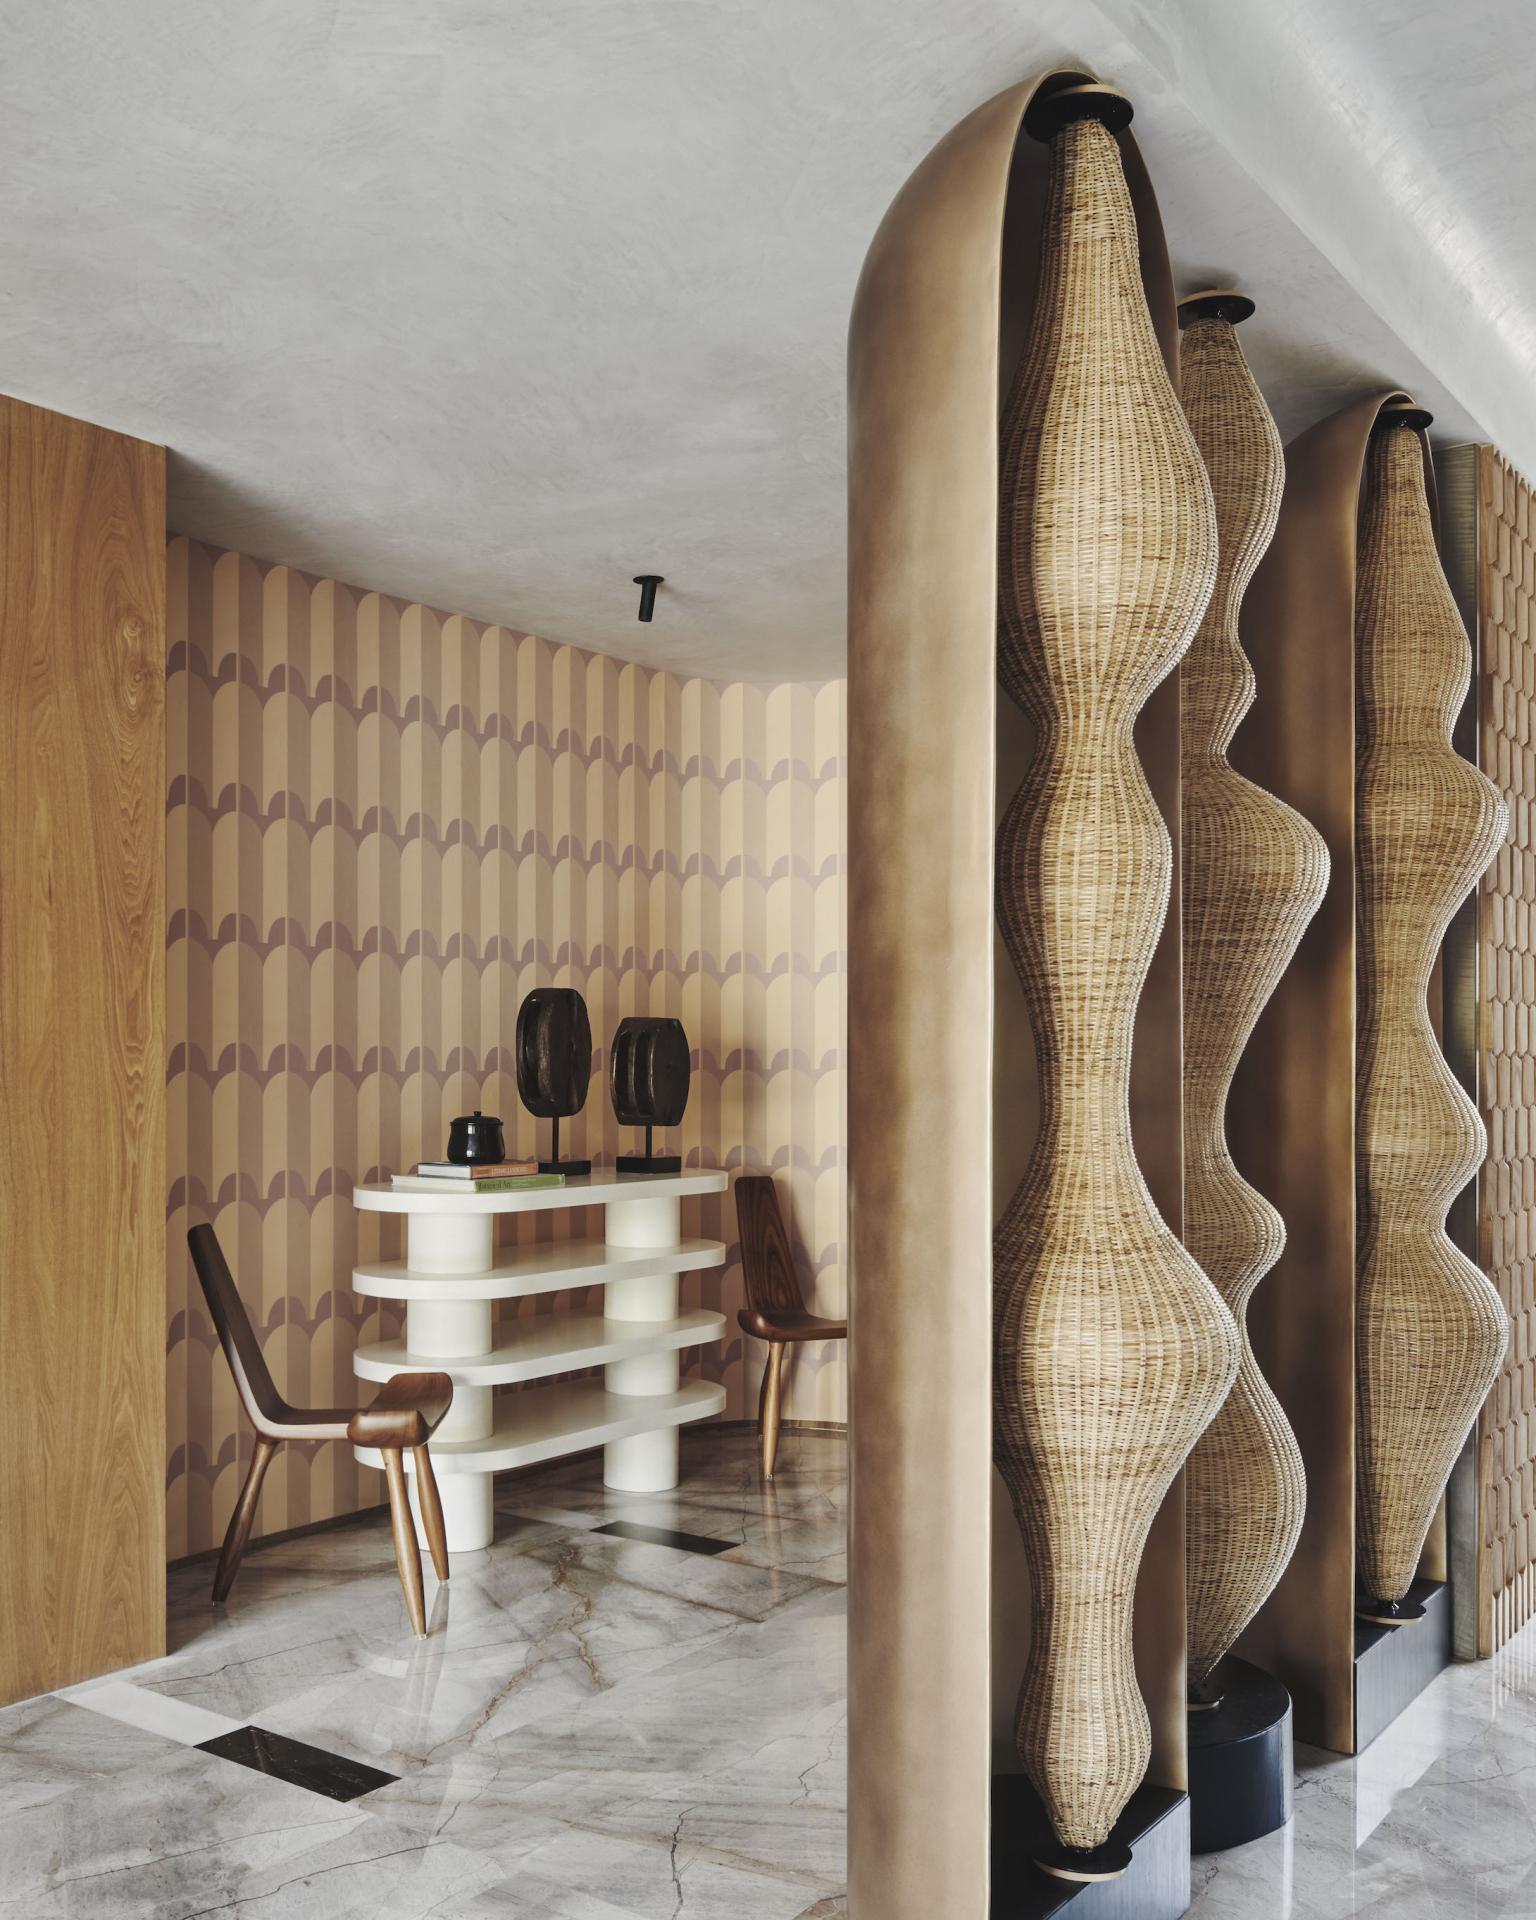 This 3000 sq. ft. Duplex in India is Inspired by London's Earle's Street